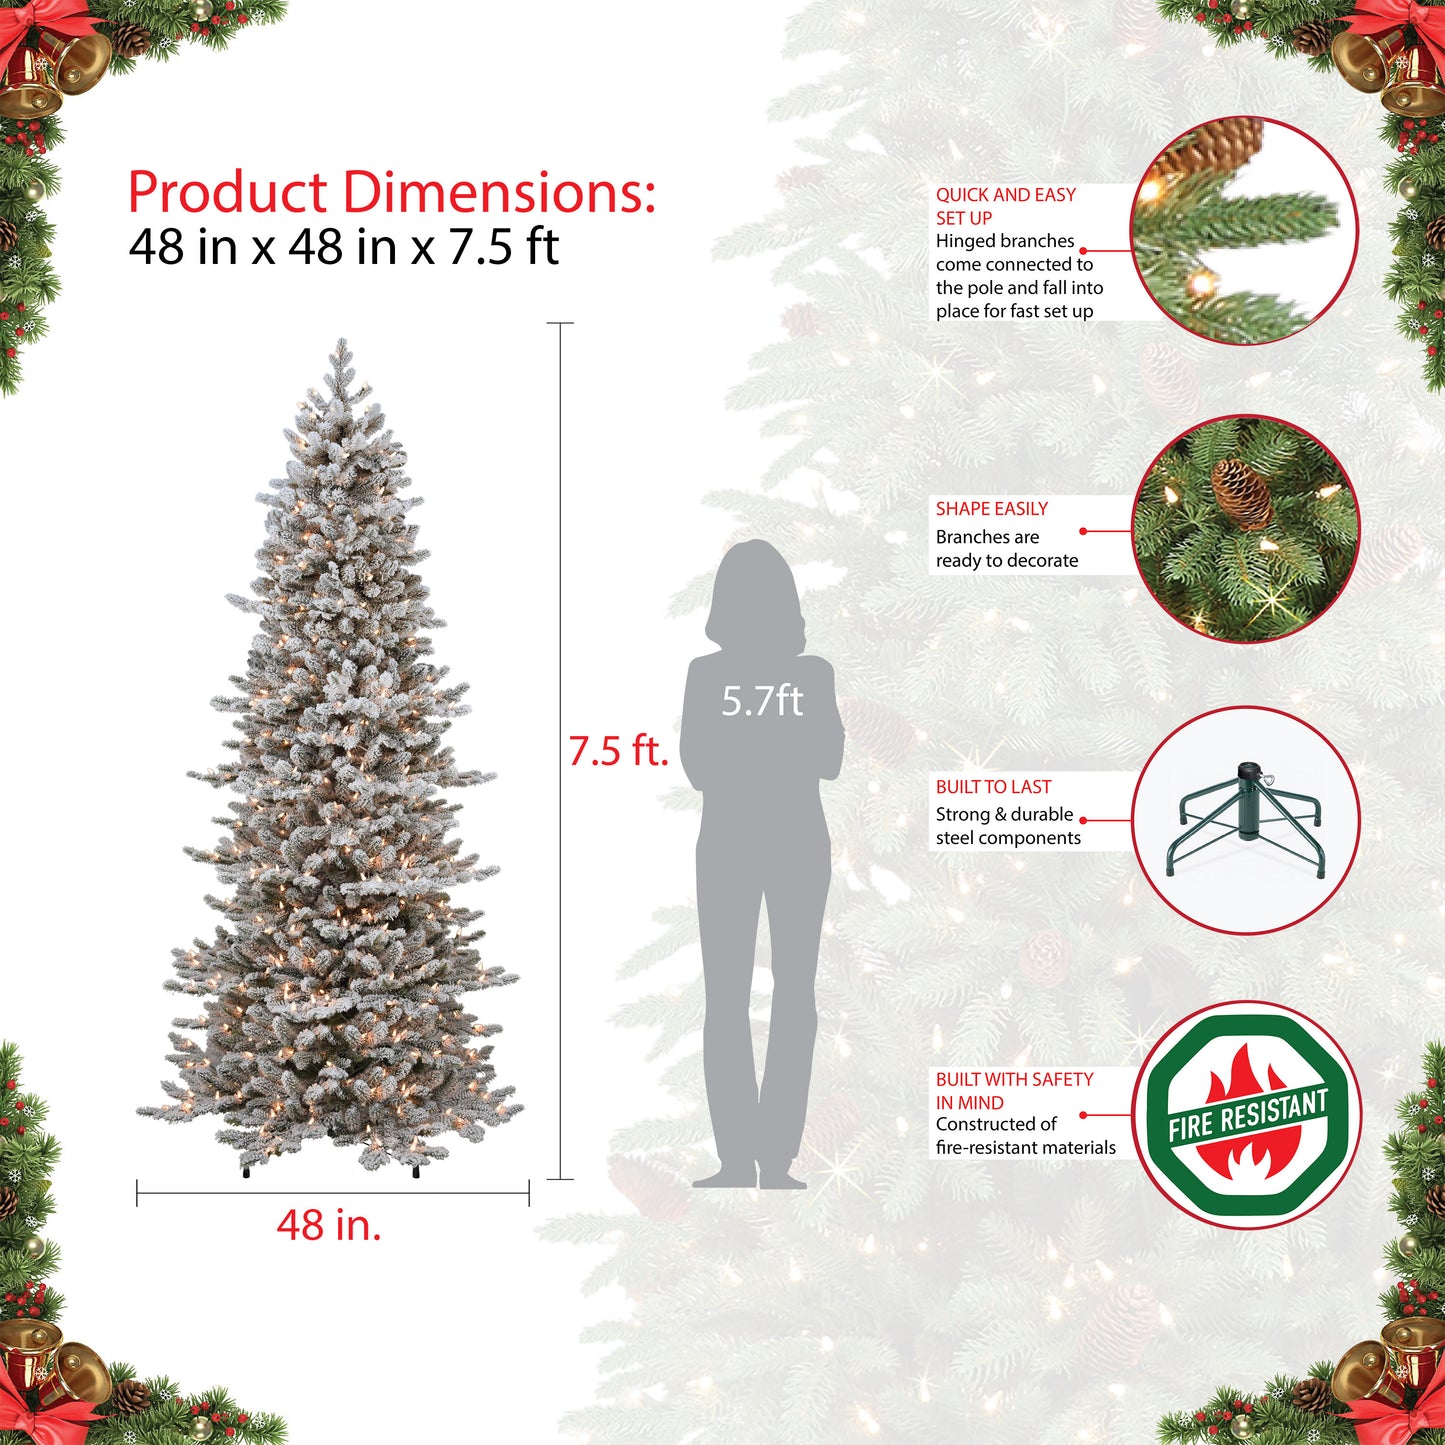 Pre-Lit 7.5' Slim Flocked Royal Majestic Douglas Spruce Artificial Christmas Tree with 500 Lights, Green